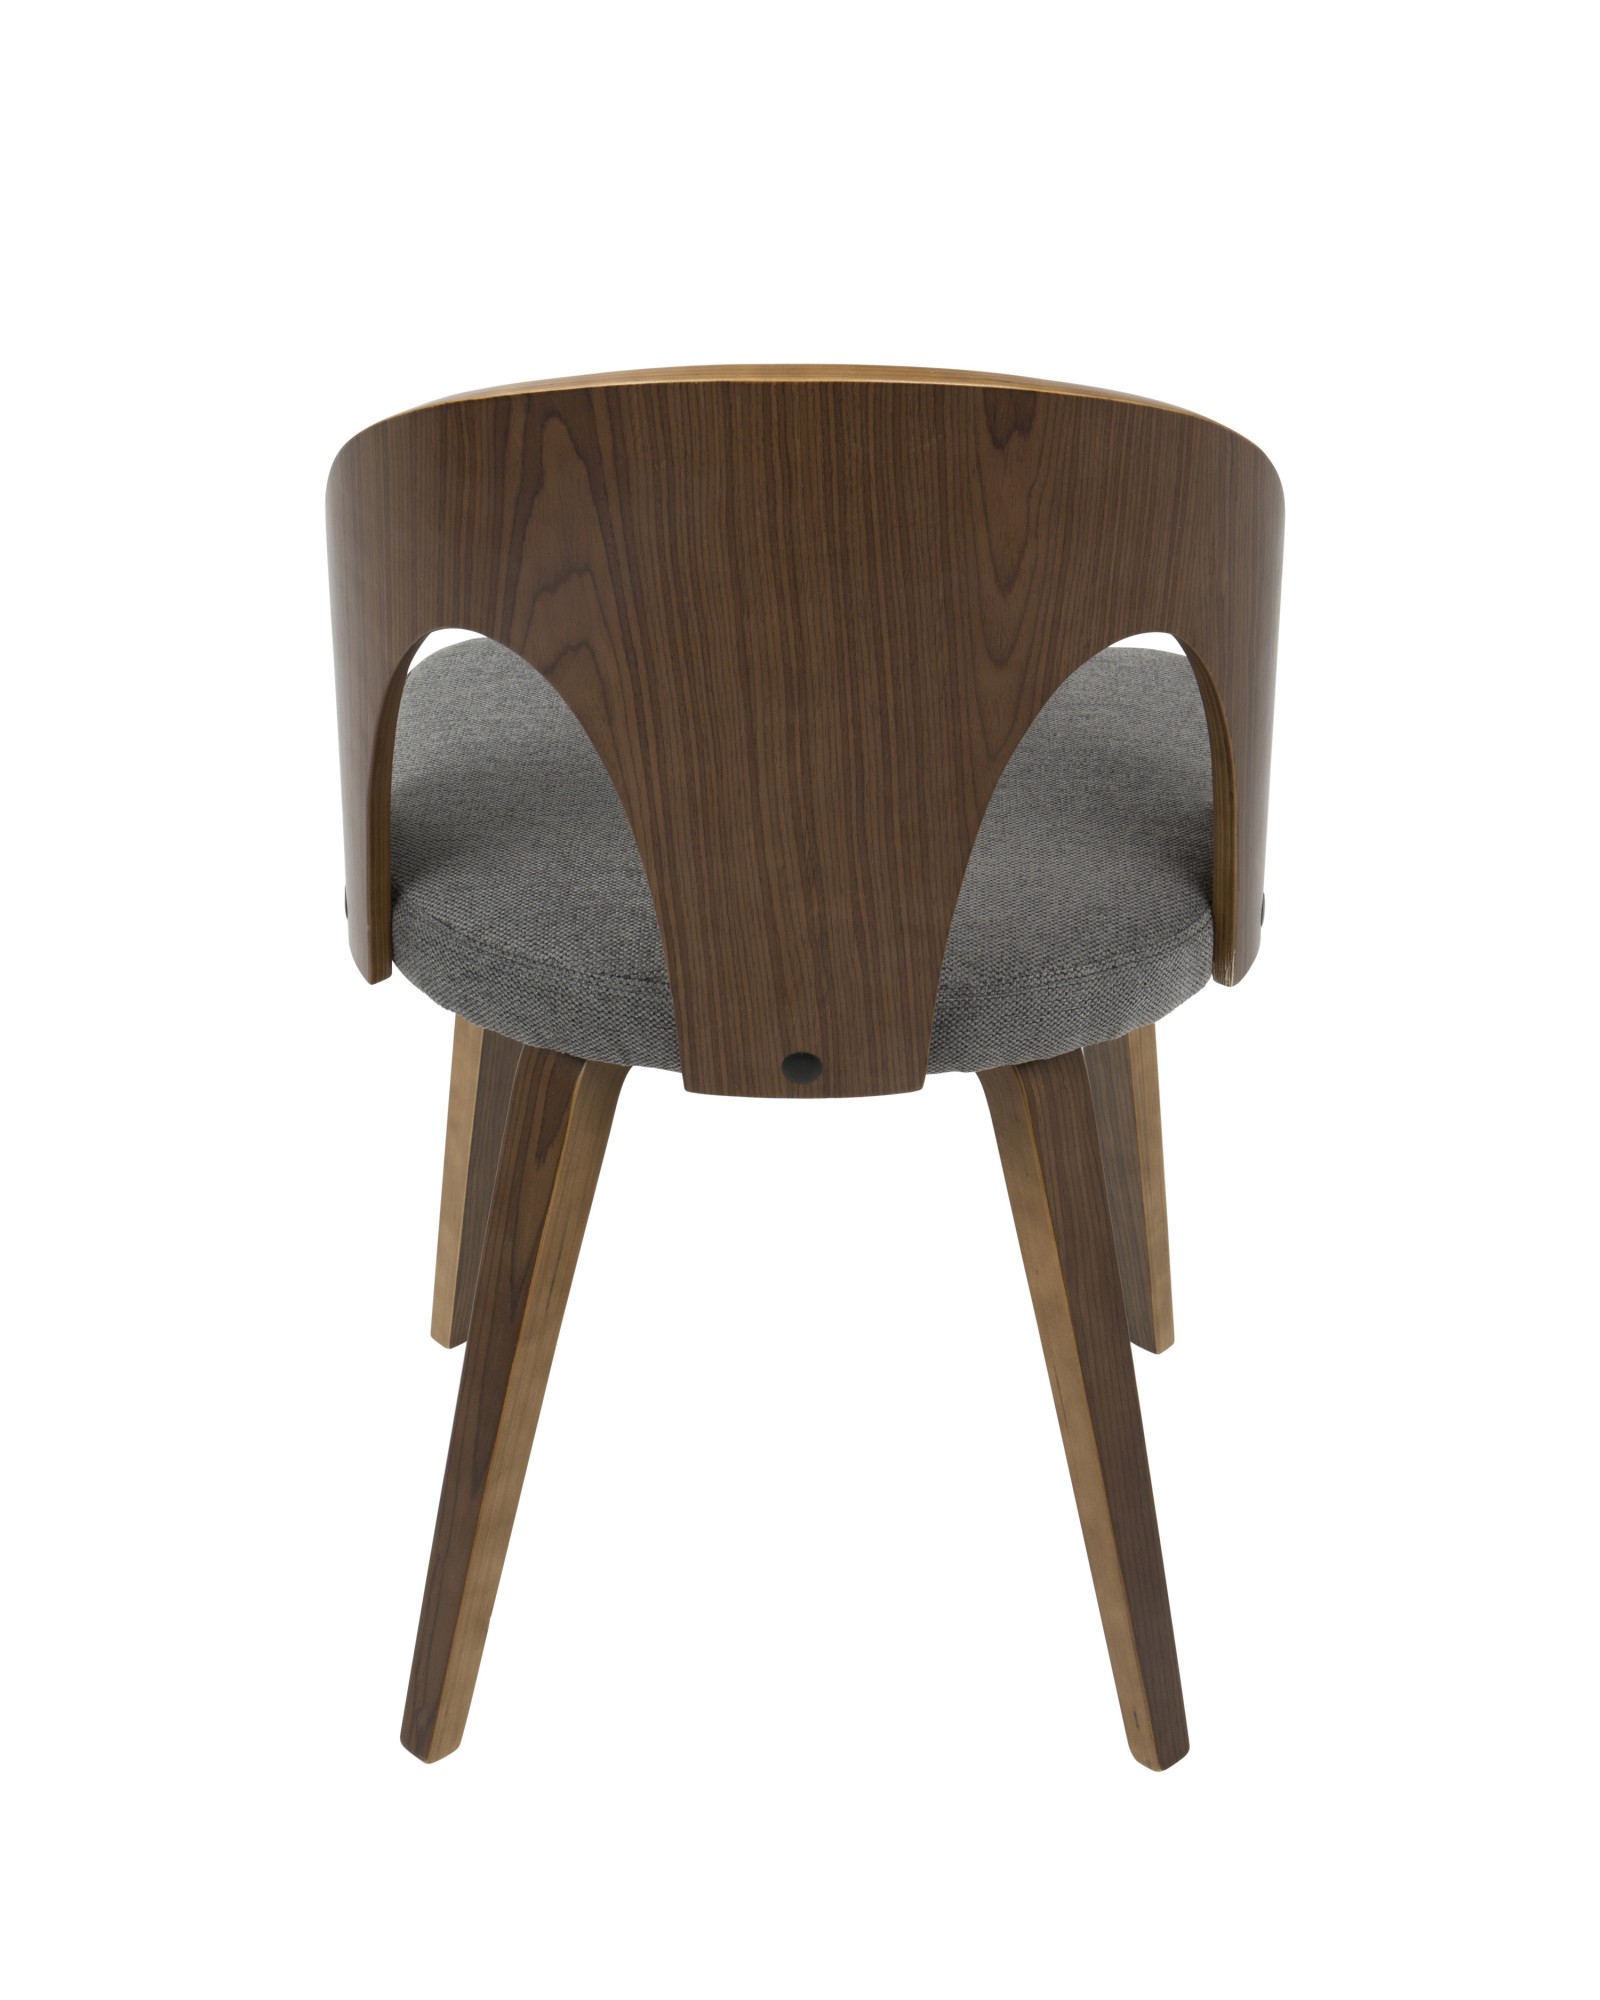 Ava Mid-Century Modern Dining/Accent Chair in Walnut and Grey Fabric